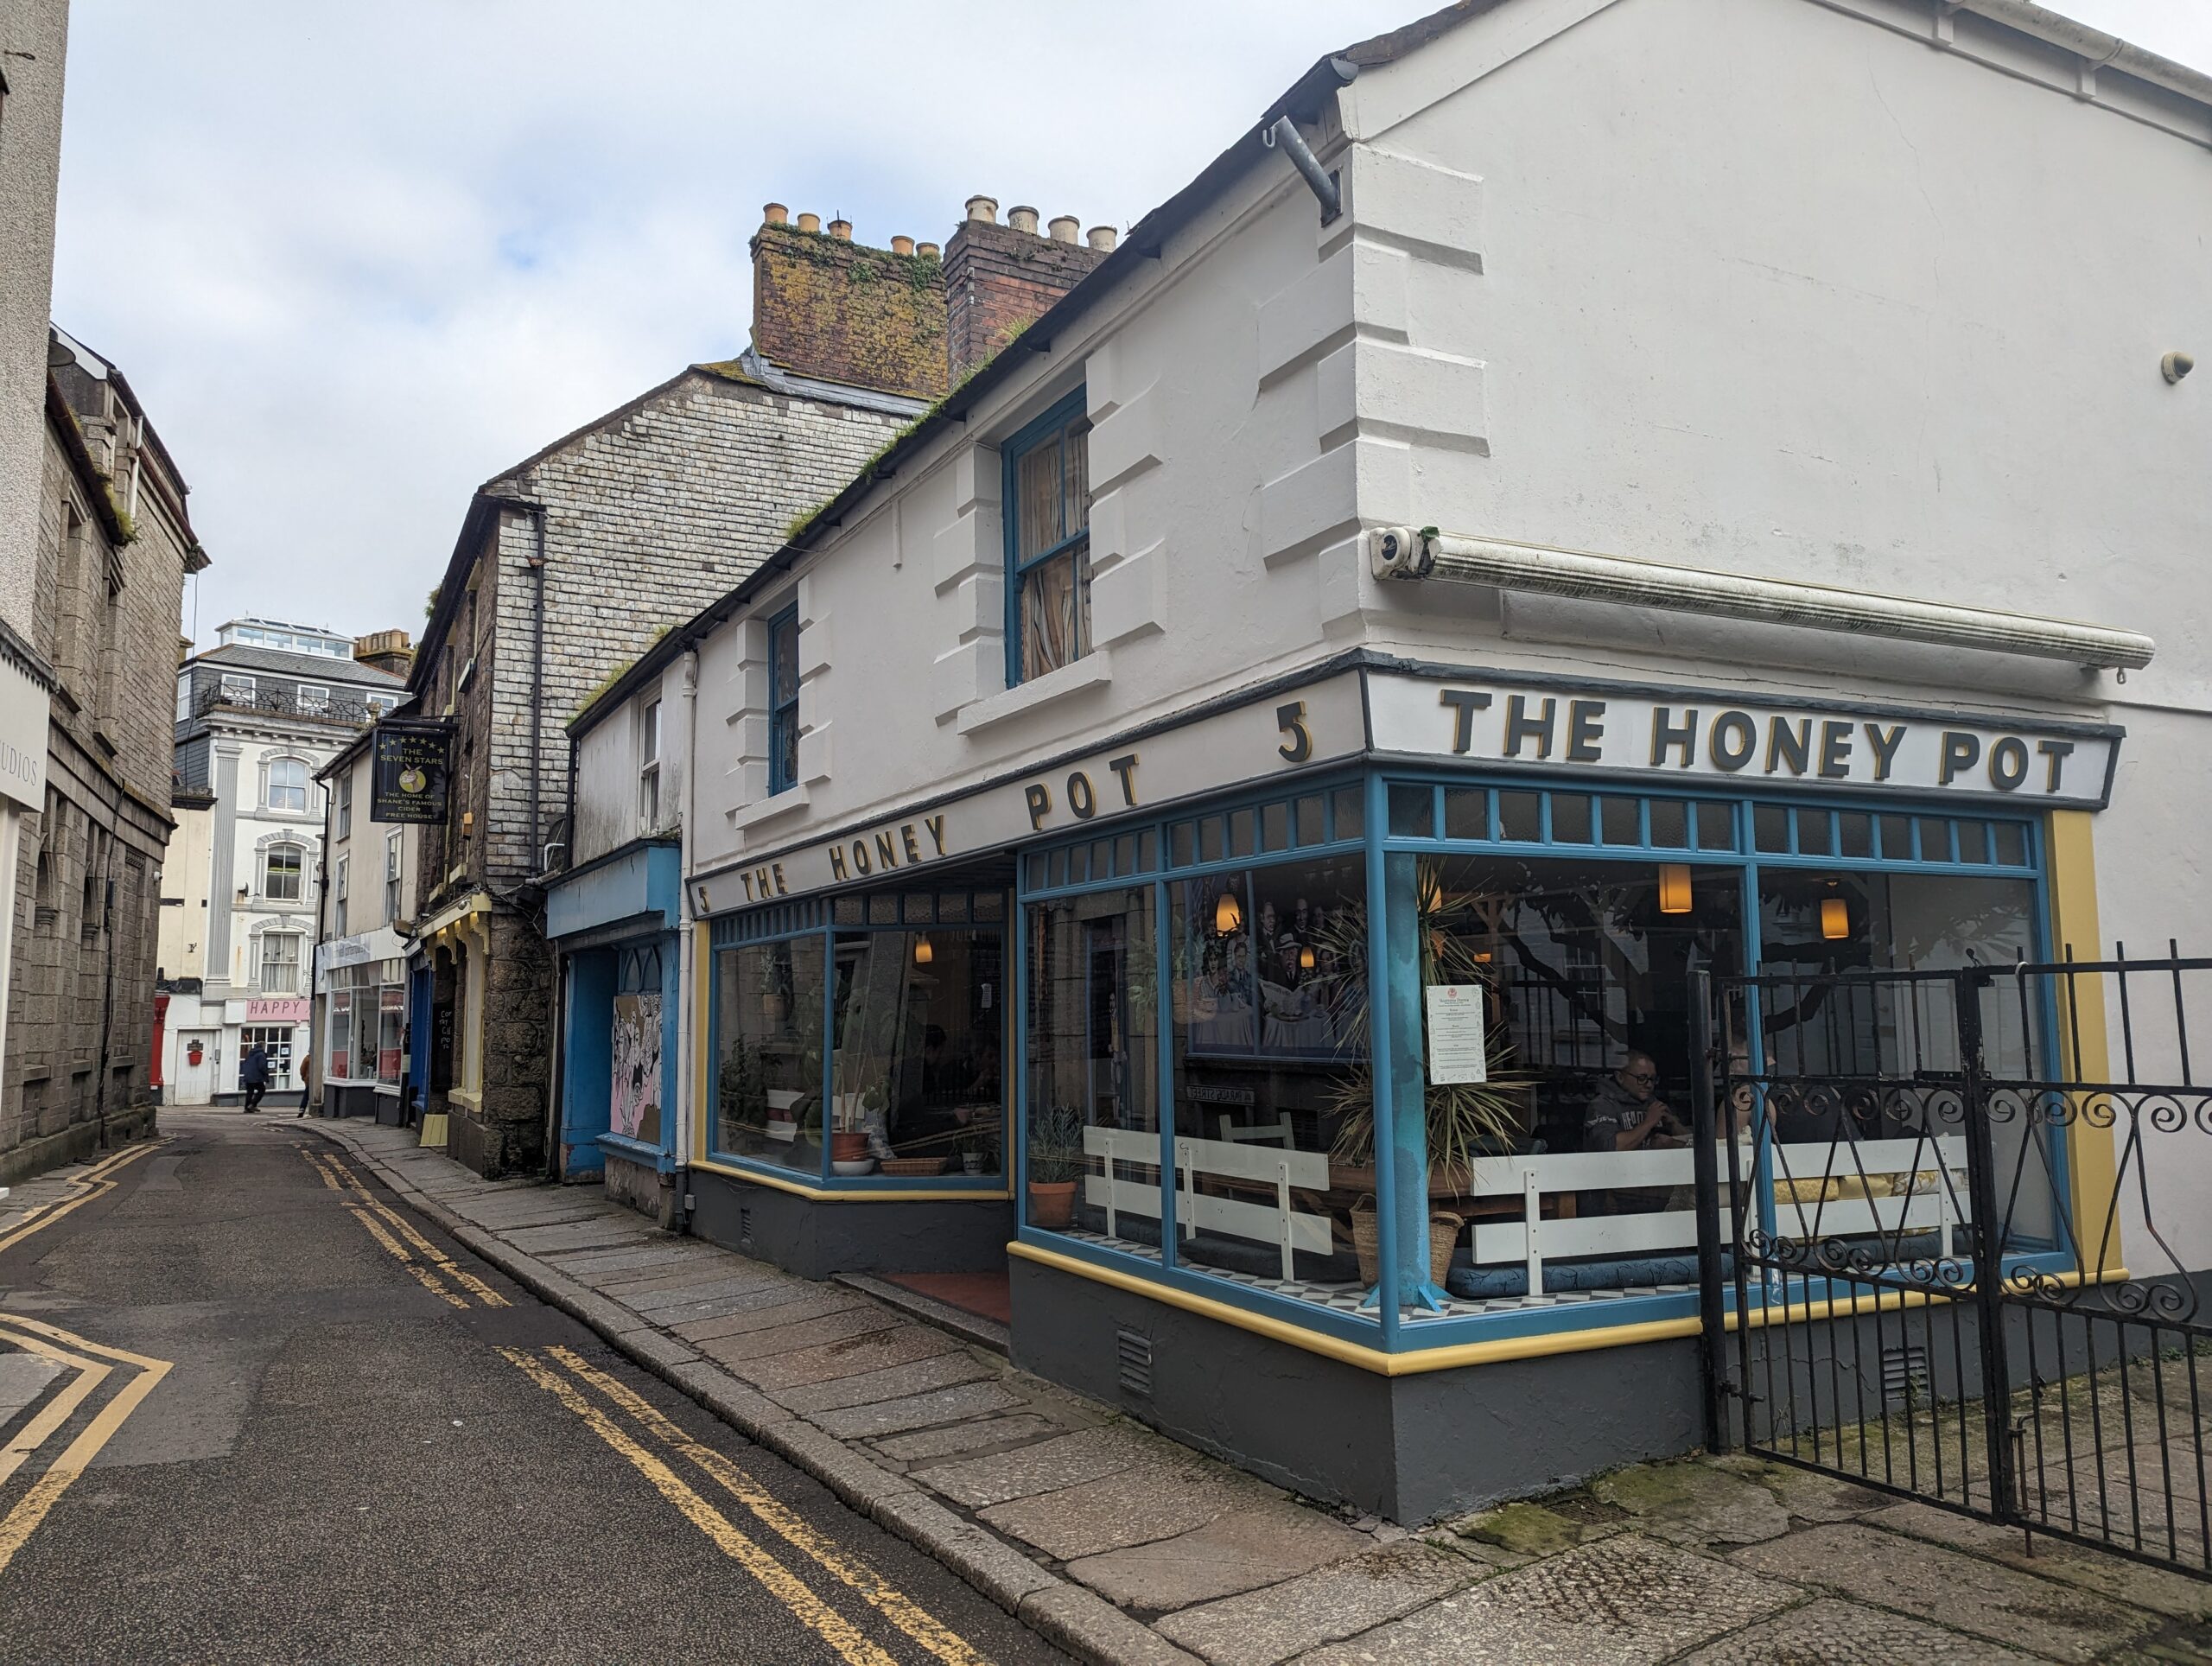 The honey pot cafe in Penzance. It's a shot of the corner of the street, with white building and blue lettering on the cafe. 